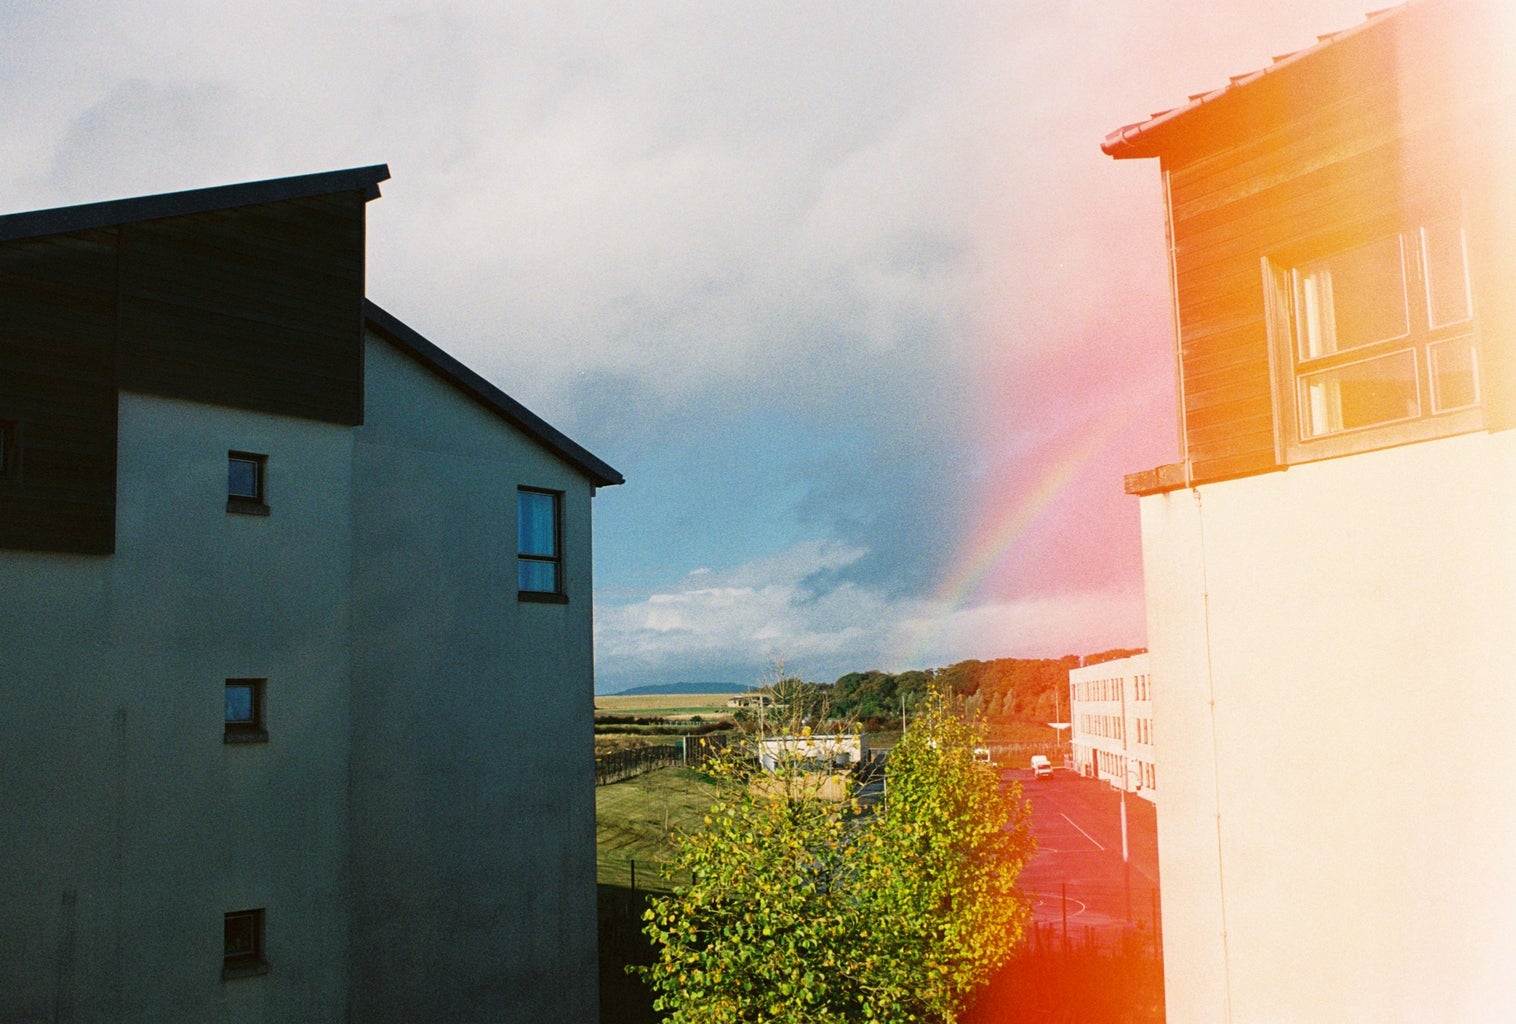 Landscape with buildings and rainbow